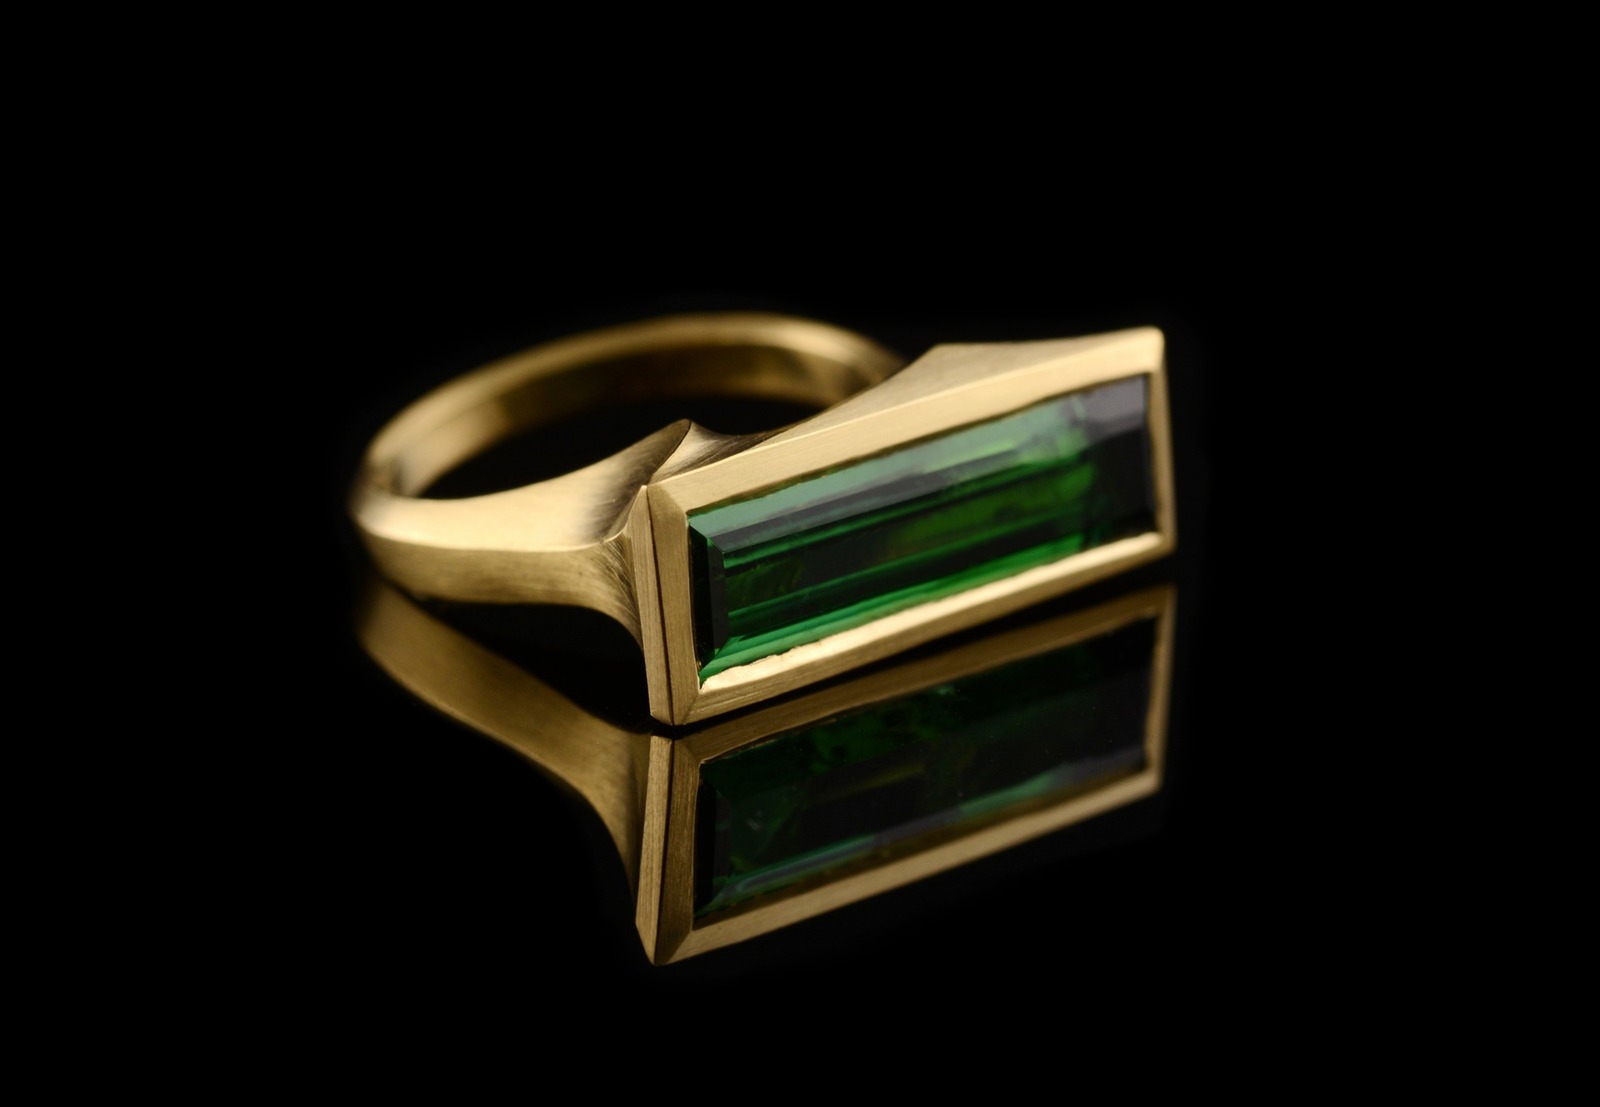 Carved Arris cocktail ring 18 carat yellow gold and green tourmaline